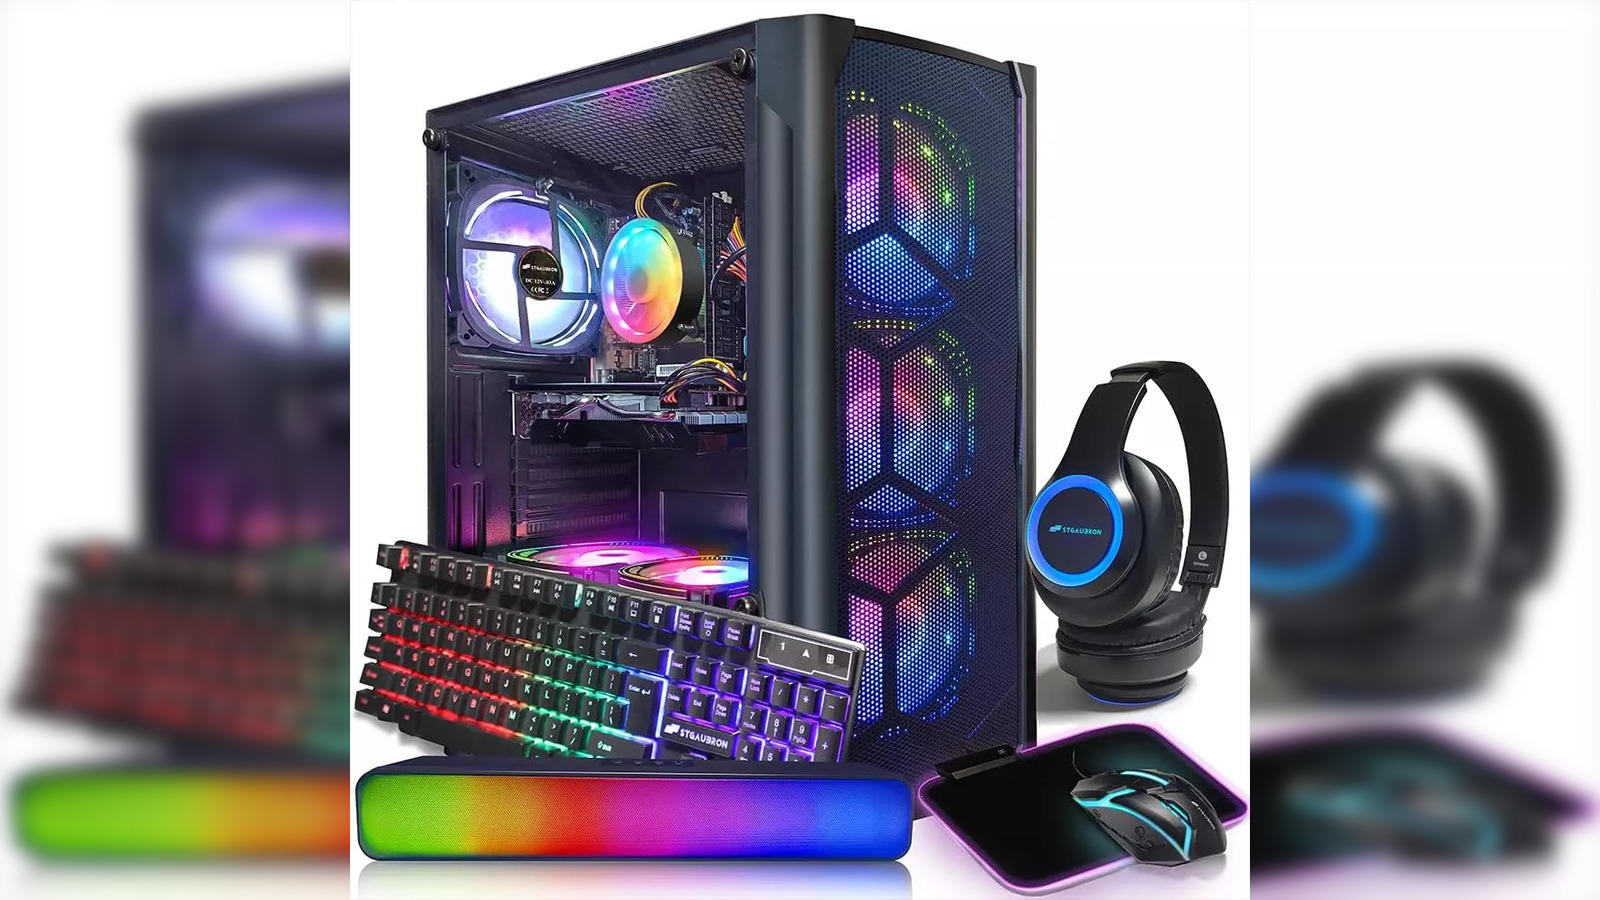 The best gaming PCs in 2021